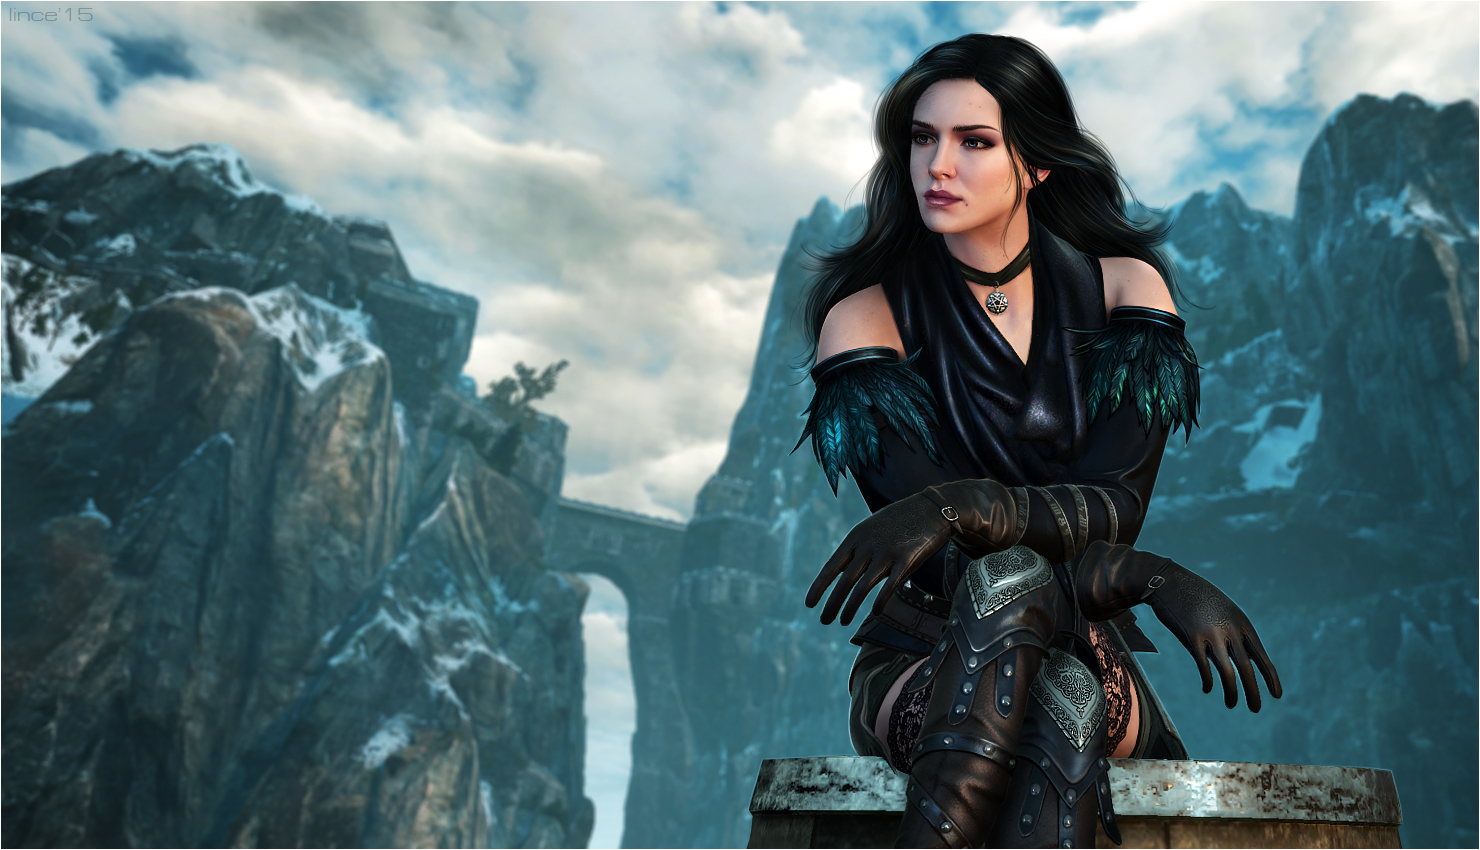 the_witcher_3__yennefer_by_linceeslanieva-d97lwii.jpg